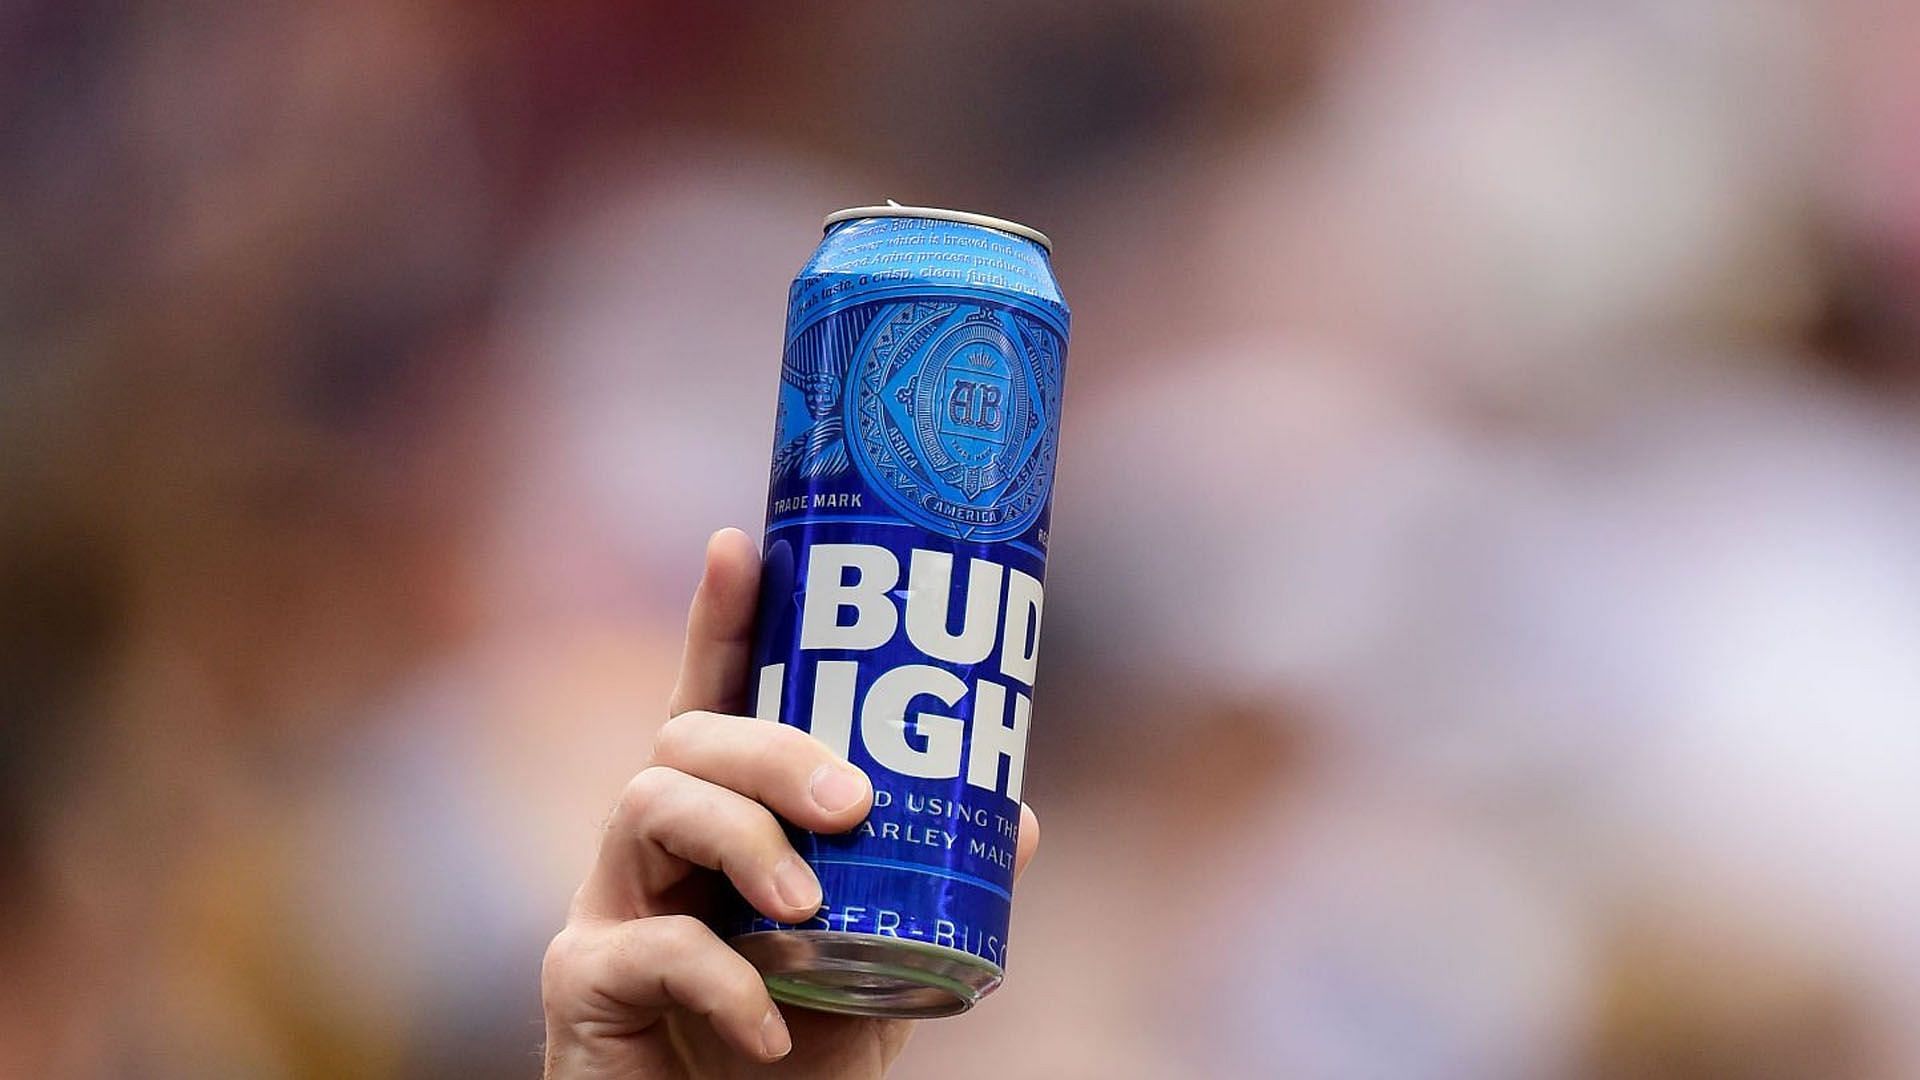 Beer Sales figure for the third week of April are out (Image via Getty Images)